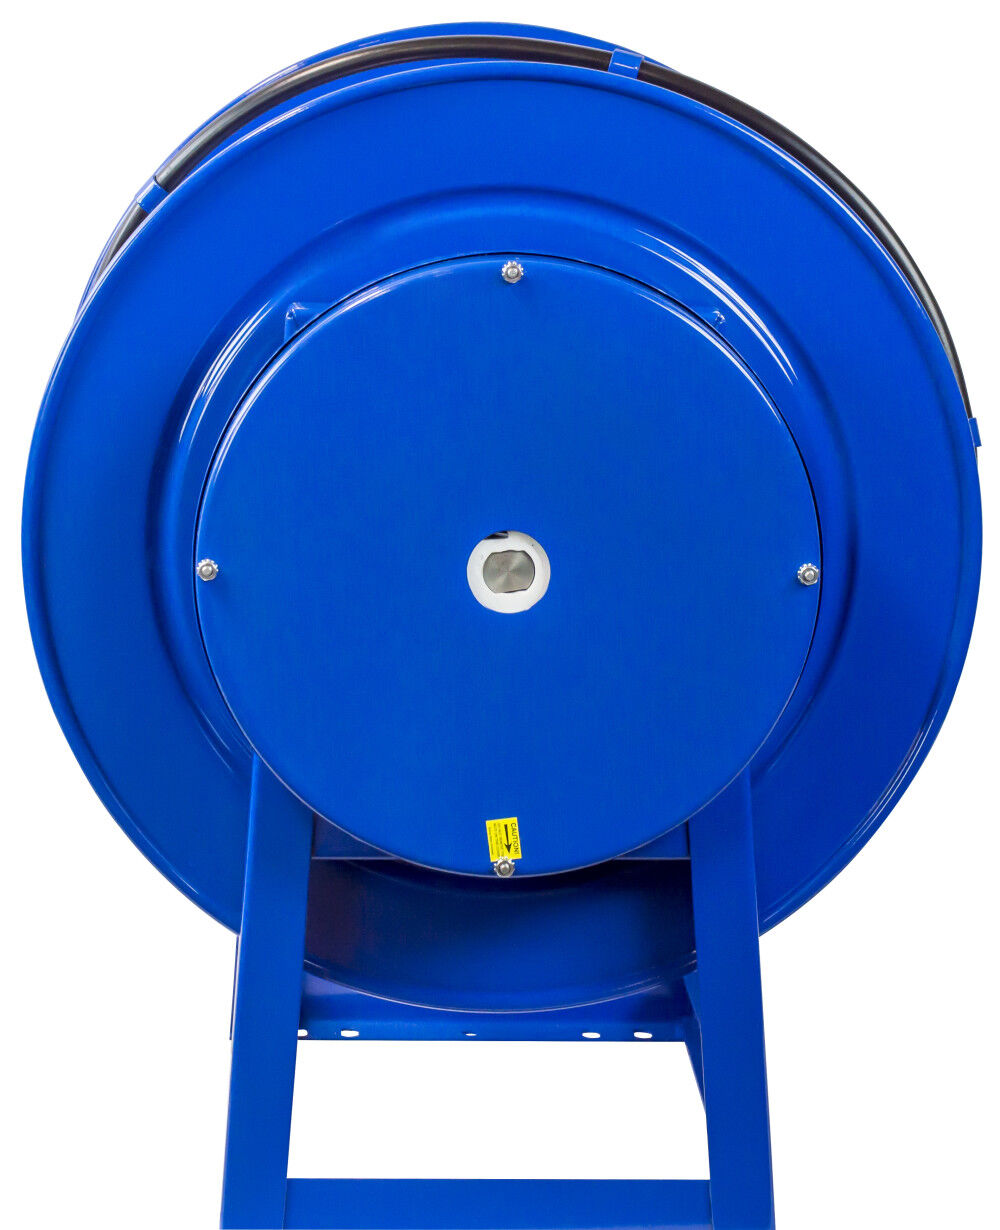 Exhaust Spring Driven Hose Reel 6in 36' No Hose 332-636